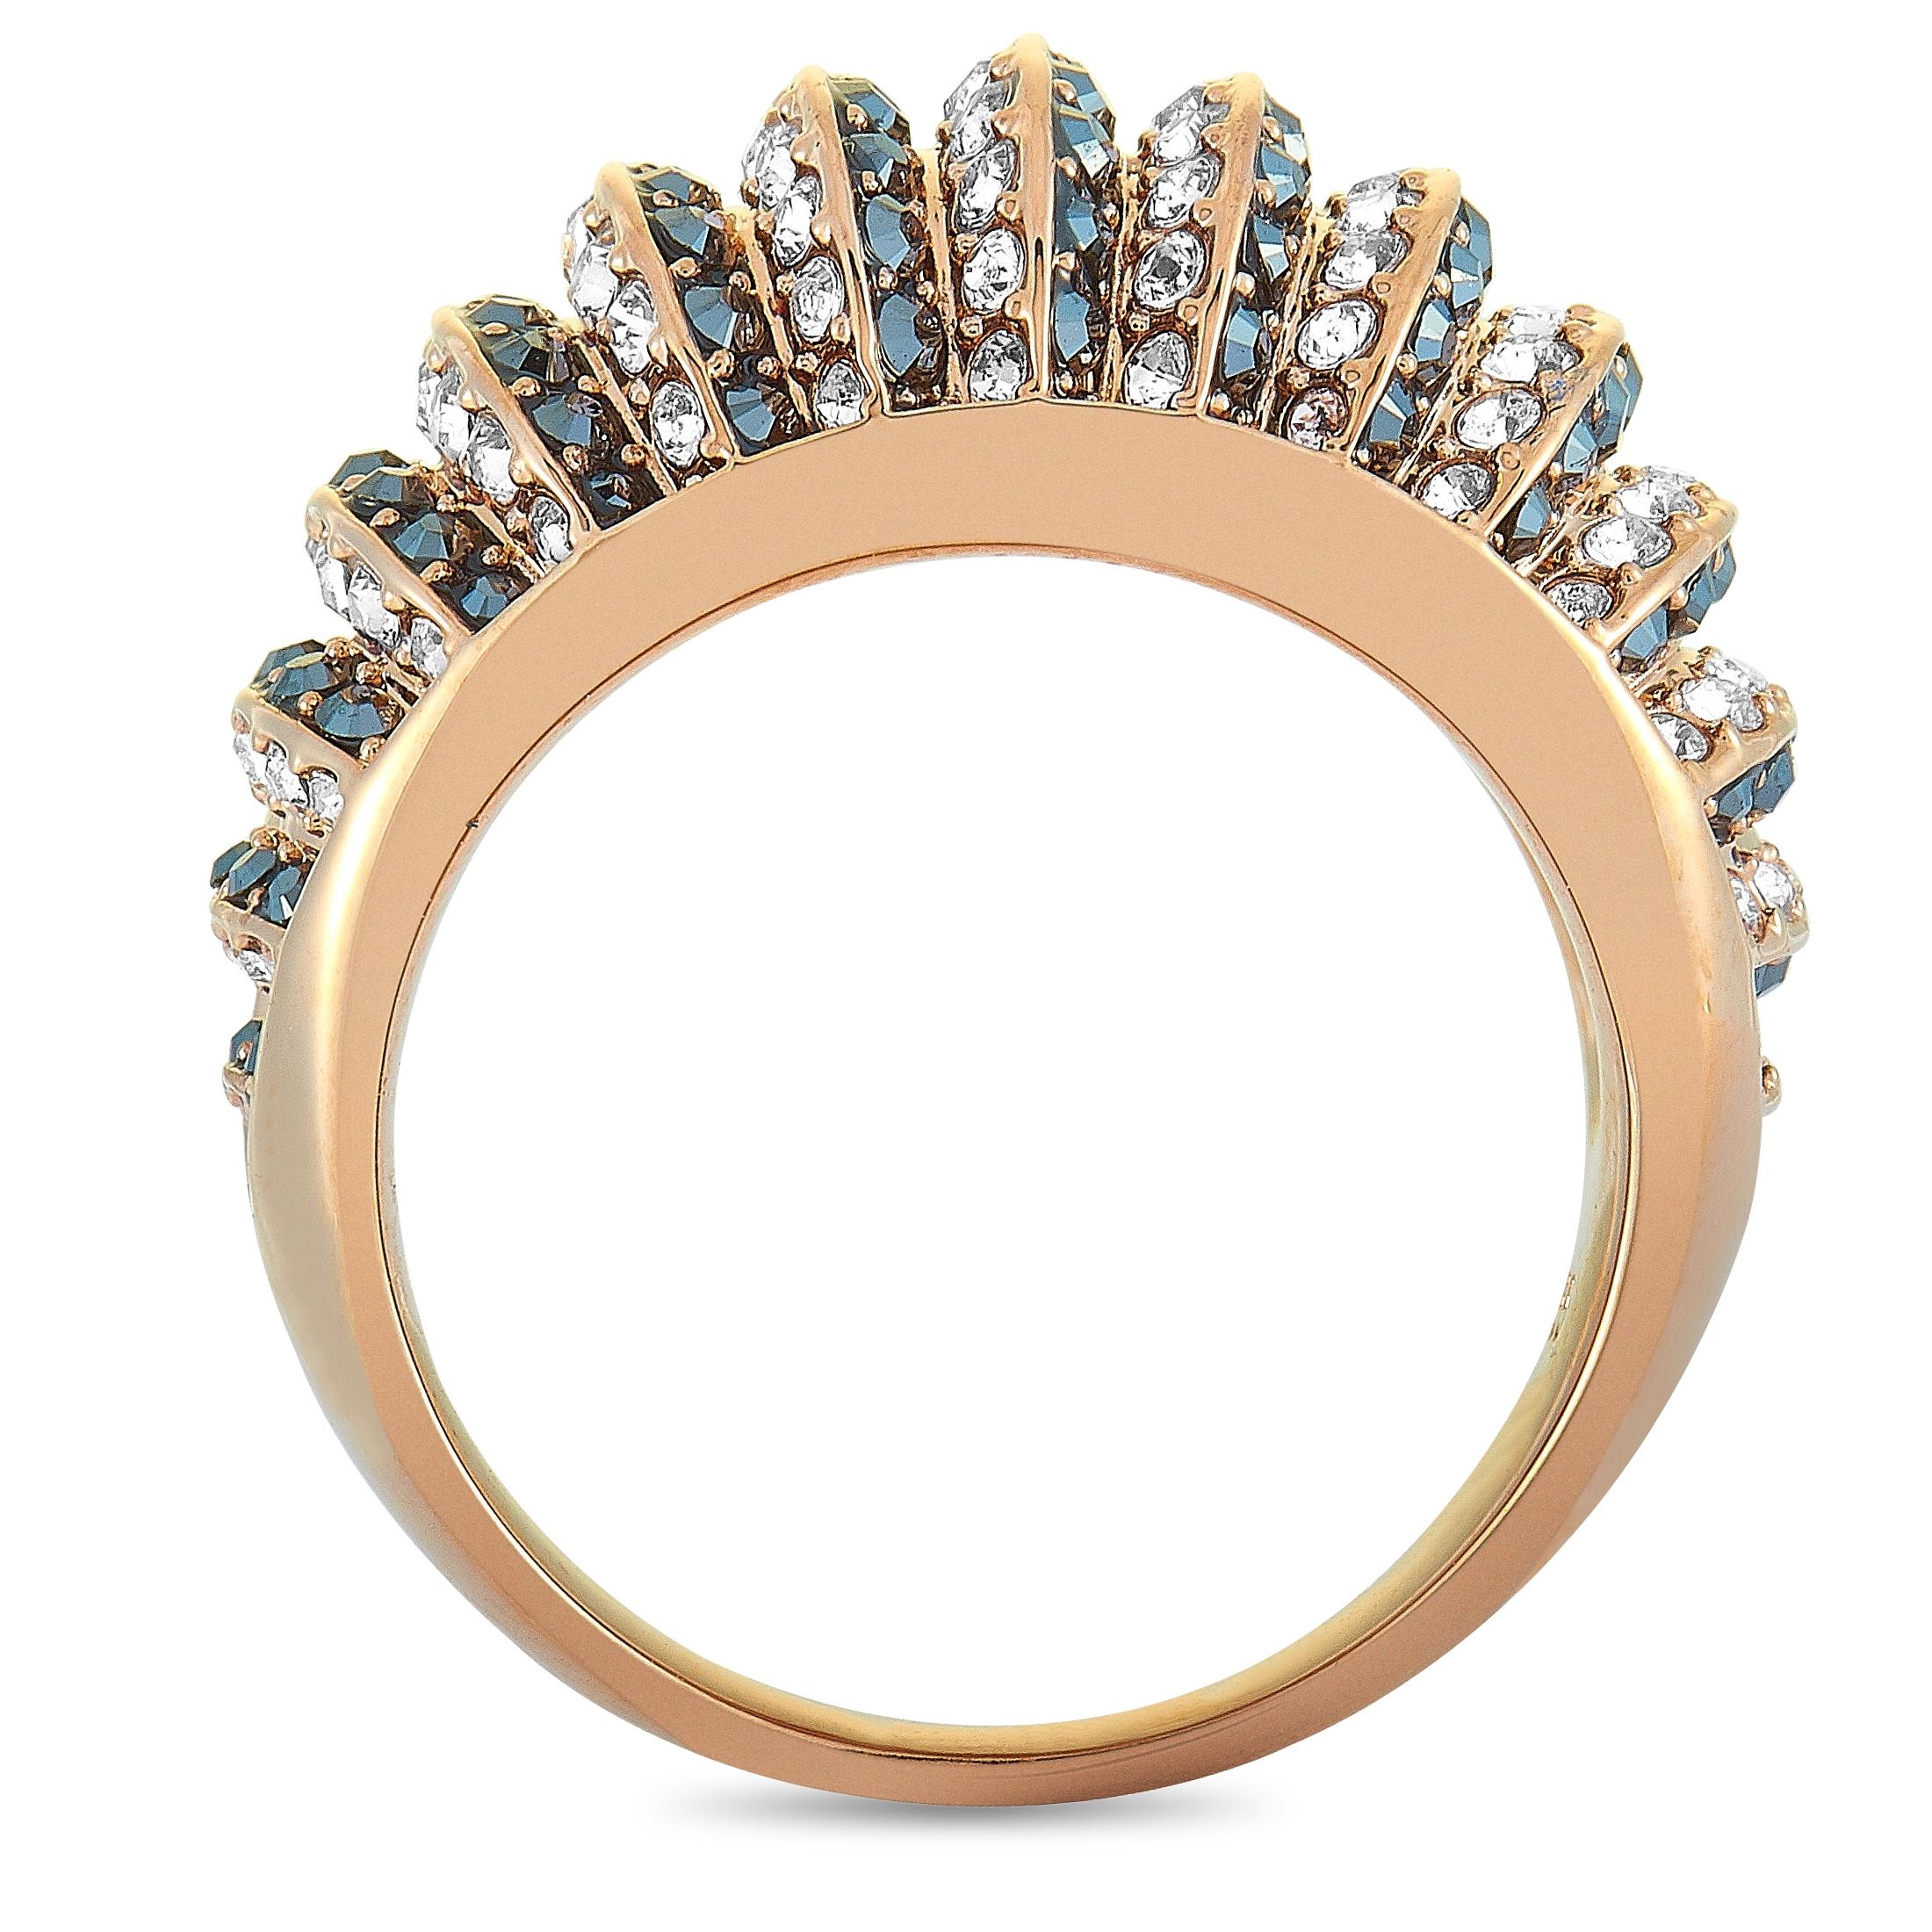 The Swarovski “Luxury” ring is made of 18K rose gold-plated stainless steel and embellished with black and clear crystals. The ring weighs 9.3 grams, boasting band thickness of 3 mm and top height of 6 mm, while top dimensions measure 21 by 12 mm.